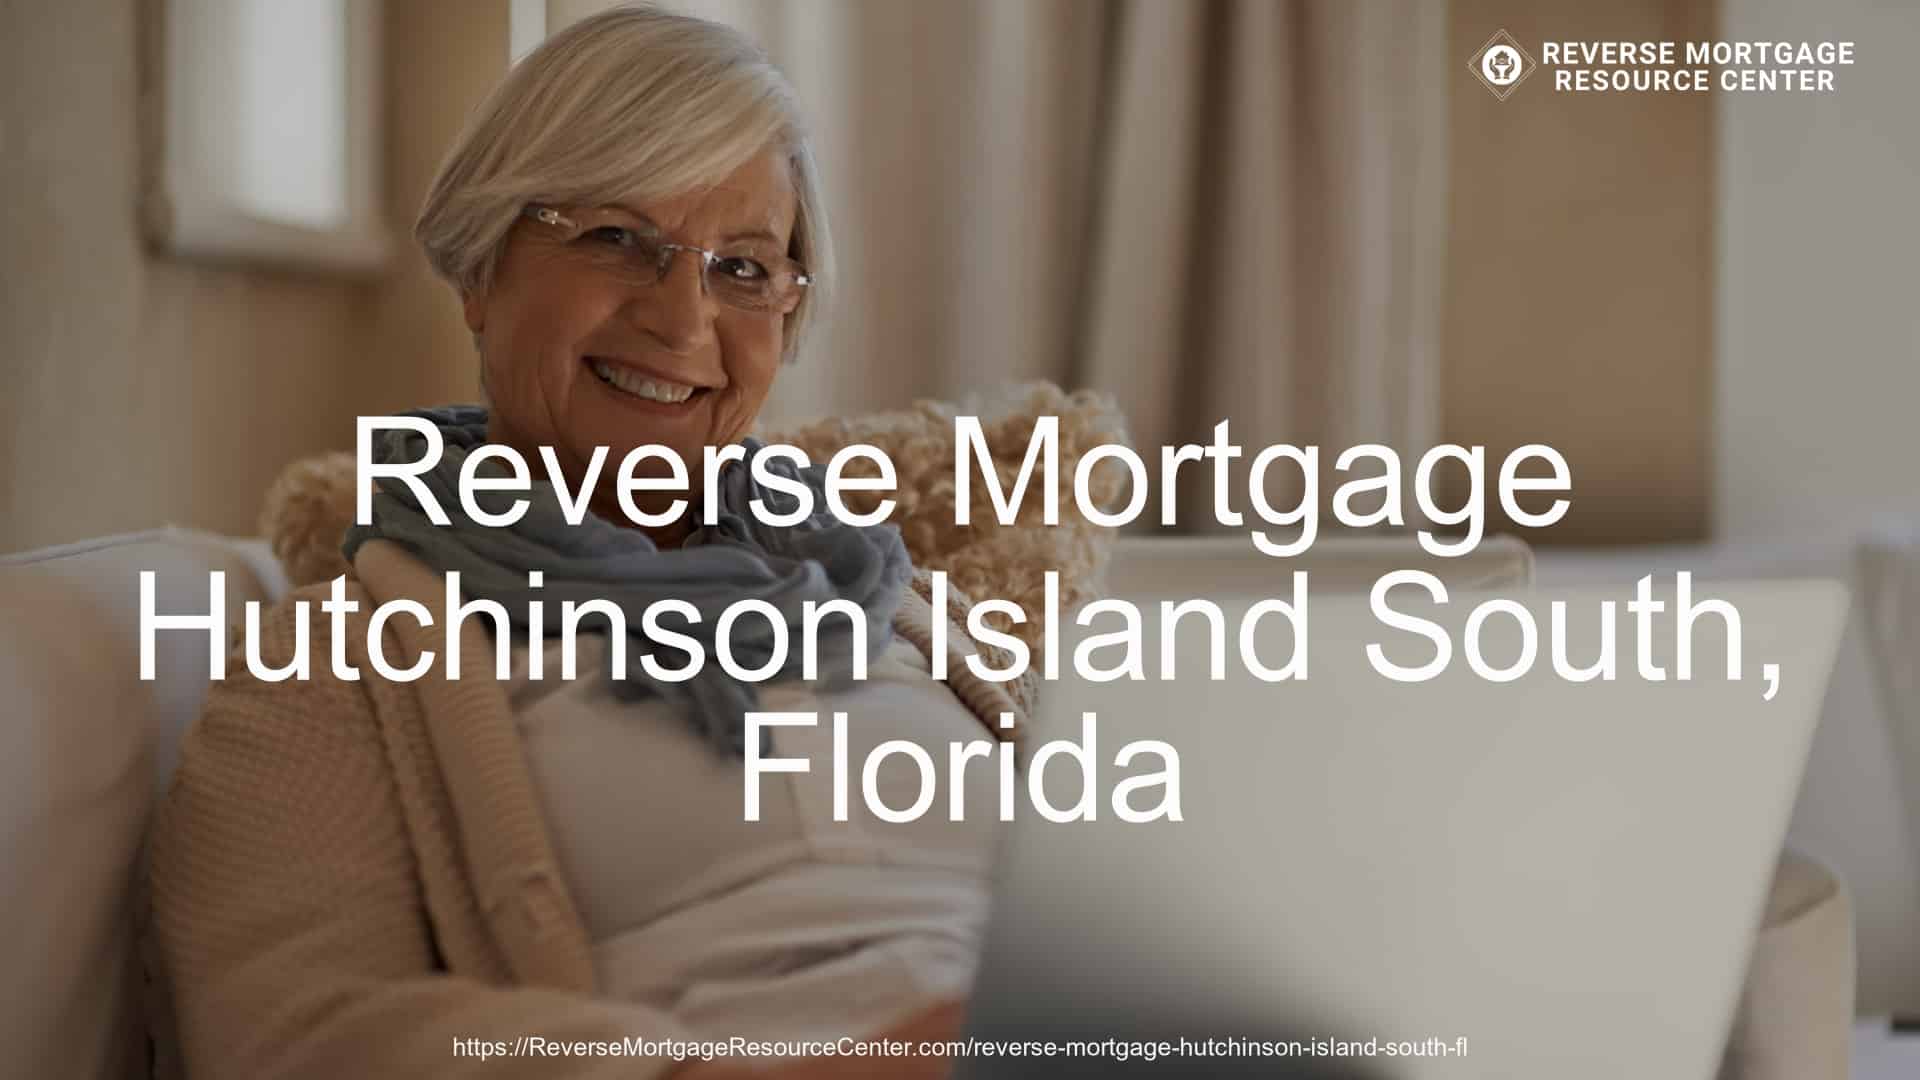 Reverse Mortgage Loans in Hutchinson Island South Florida